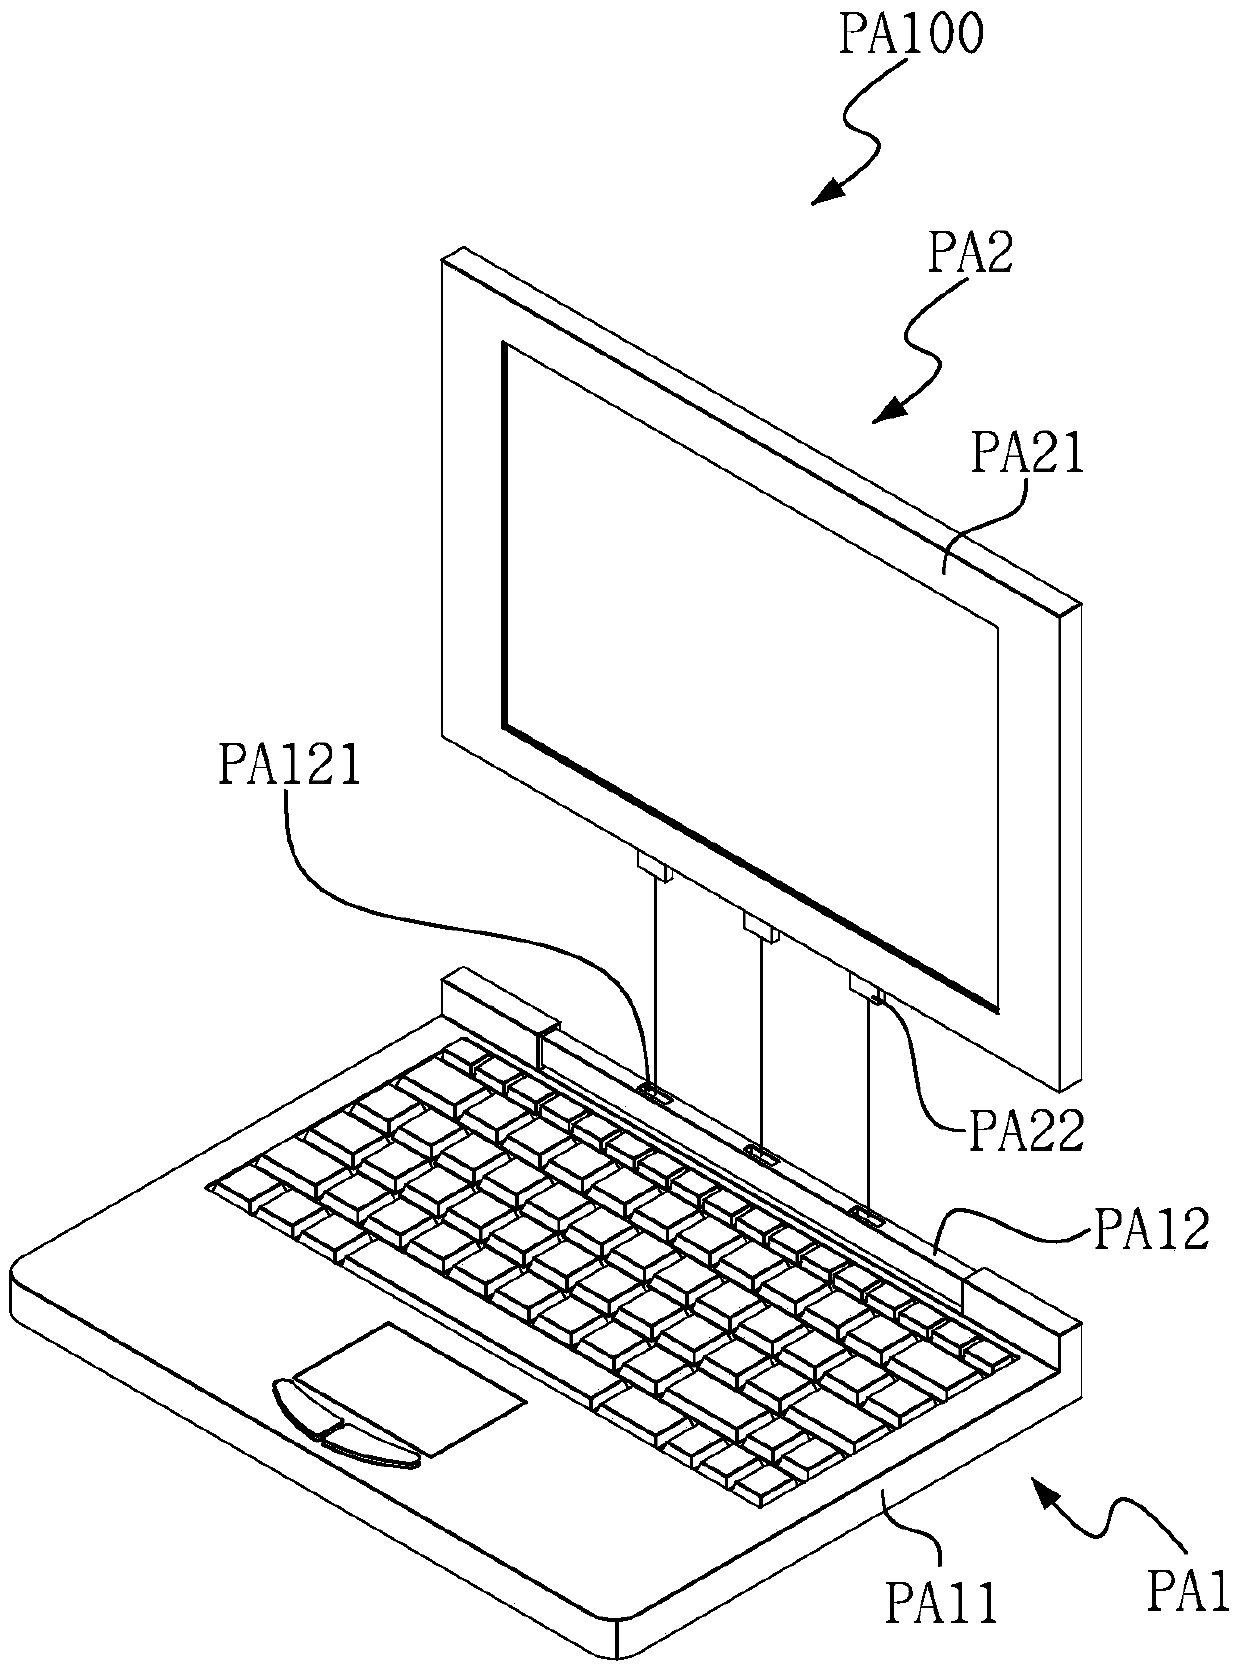 Detachable computer device and its plug-in components